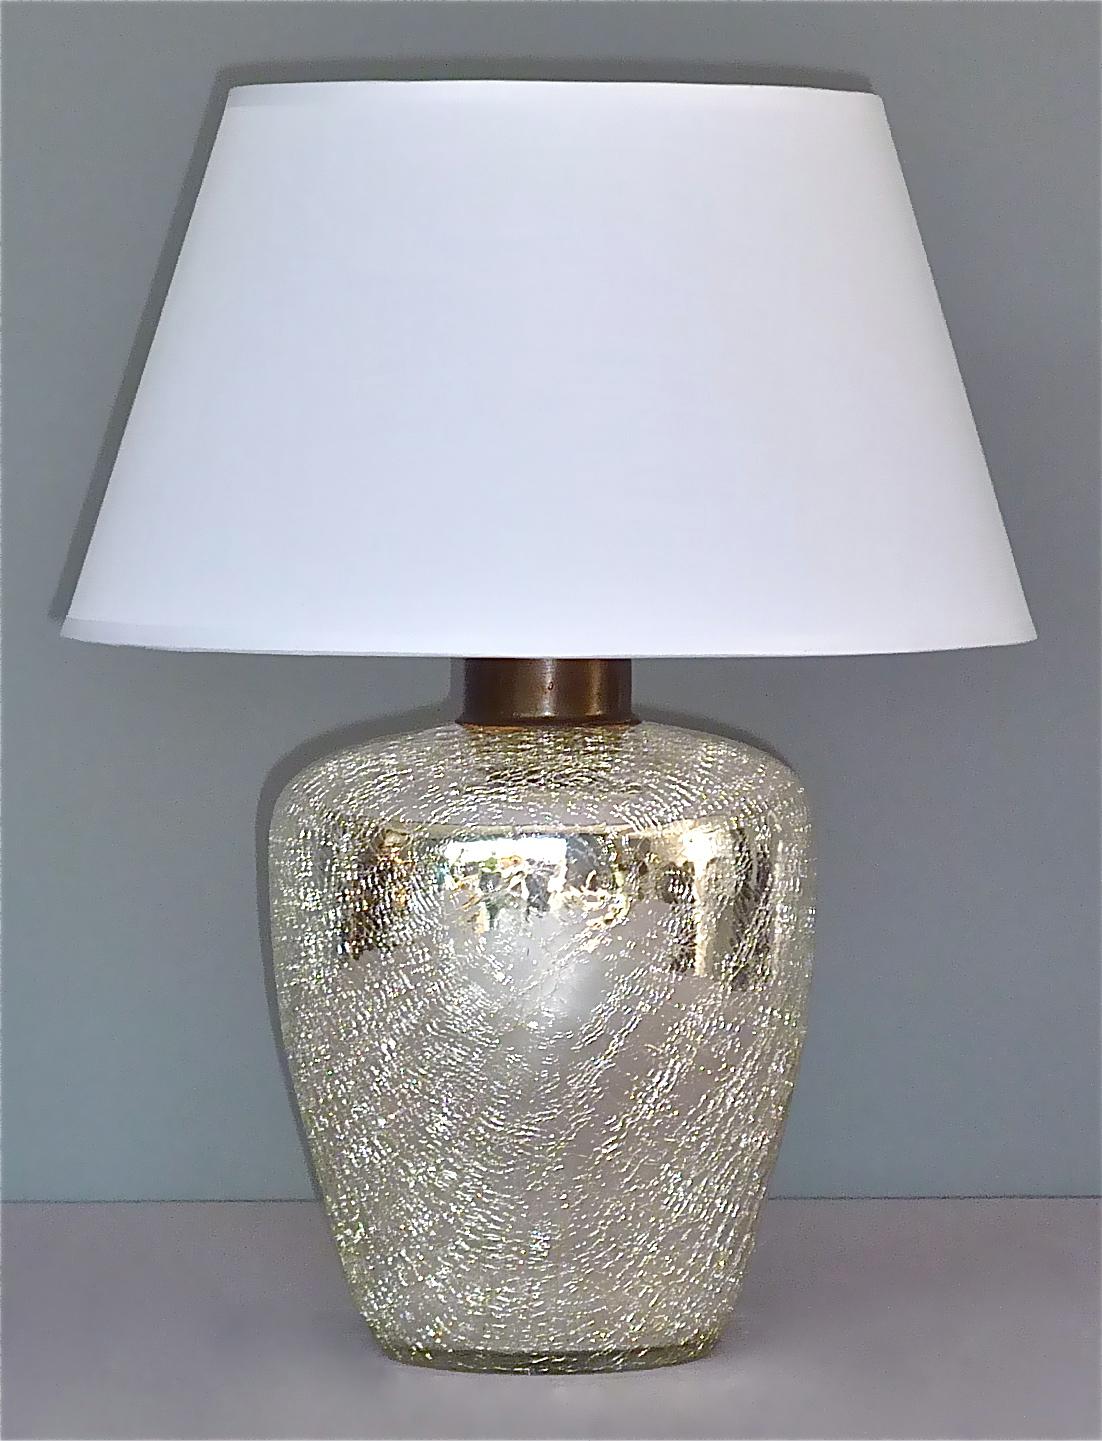 Rare Silver Art Deco Table Lamp Crackle Glass White Fabric Modernism France 1930 For Sale 7